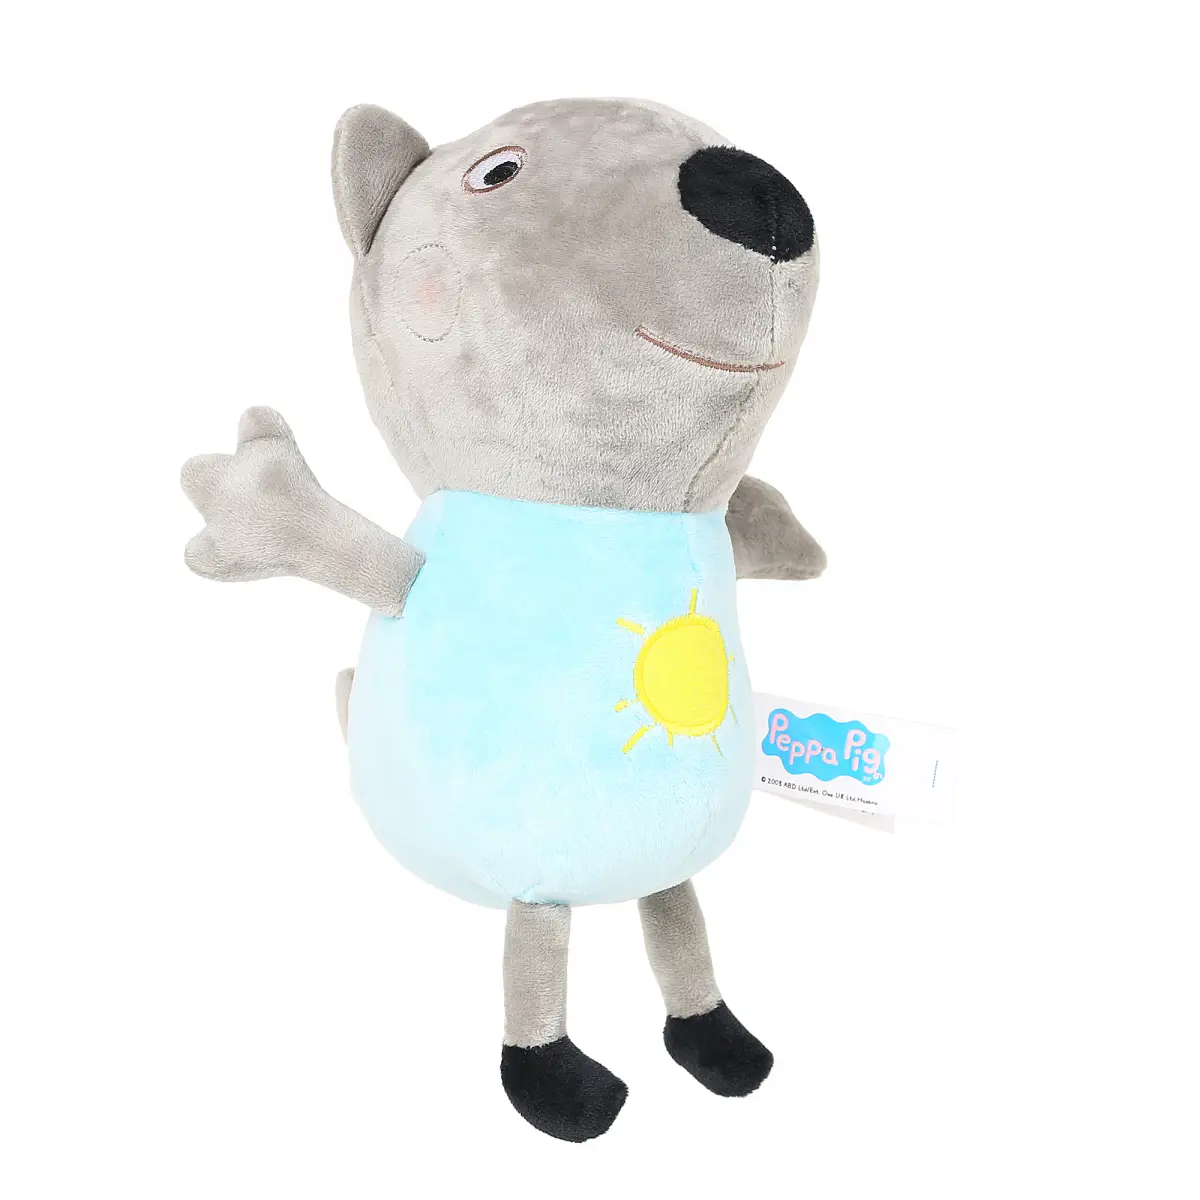 Peppa Pig Danny Dog Soft Toy for Kids, 30cm, 18M+, Multicolour